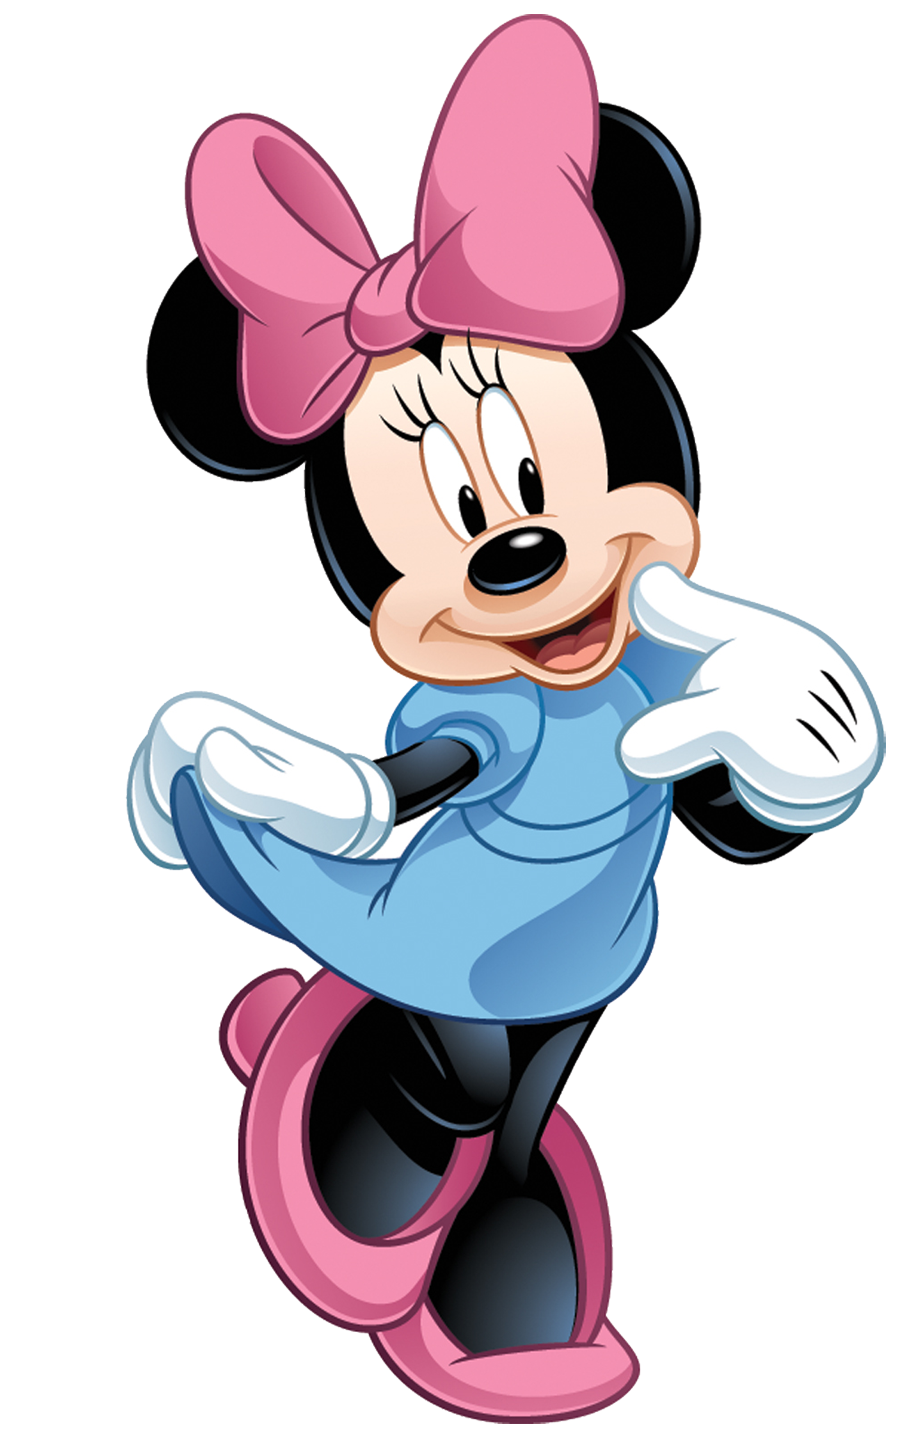 Pink Ribbon And Blue Clothes, Sweet, Cute Minnie Mouse PNG Image #40243